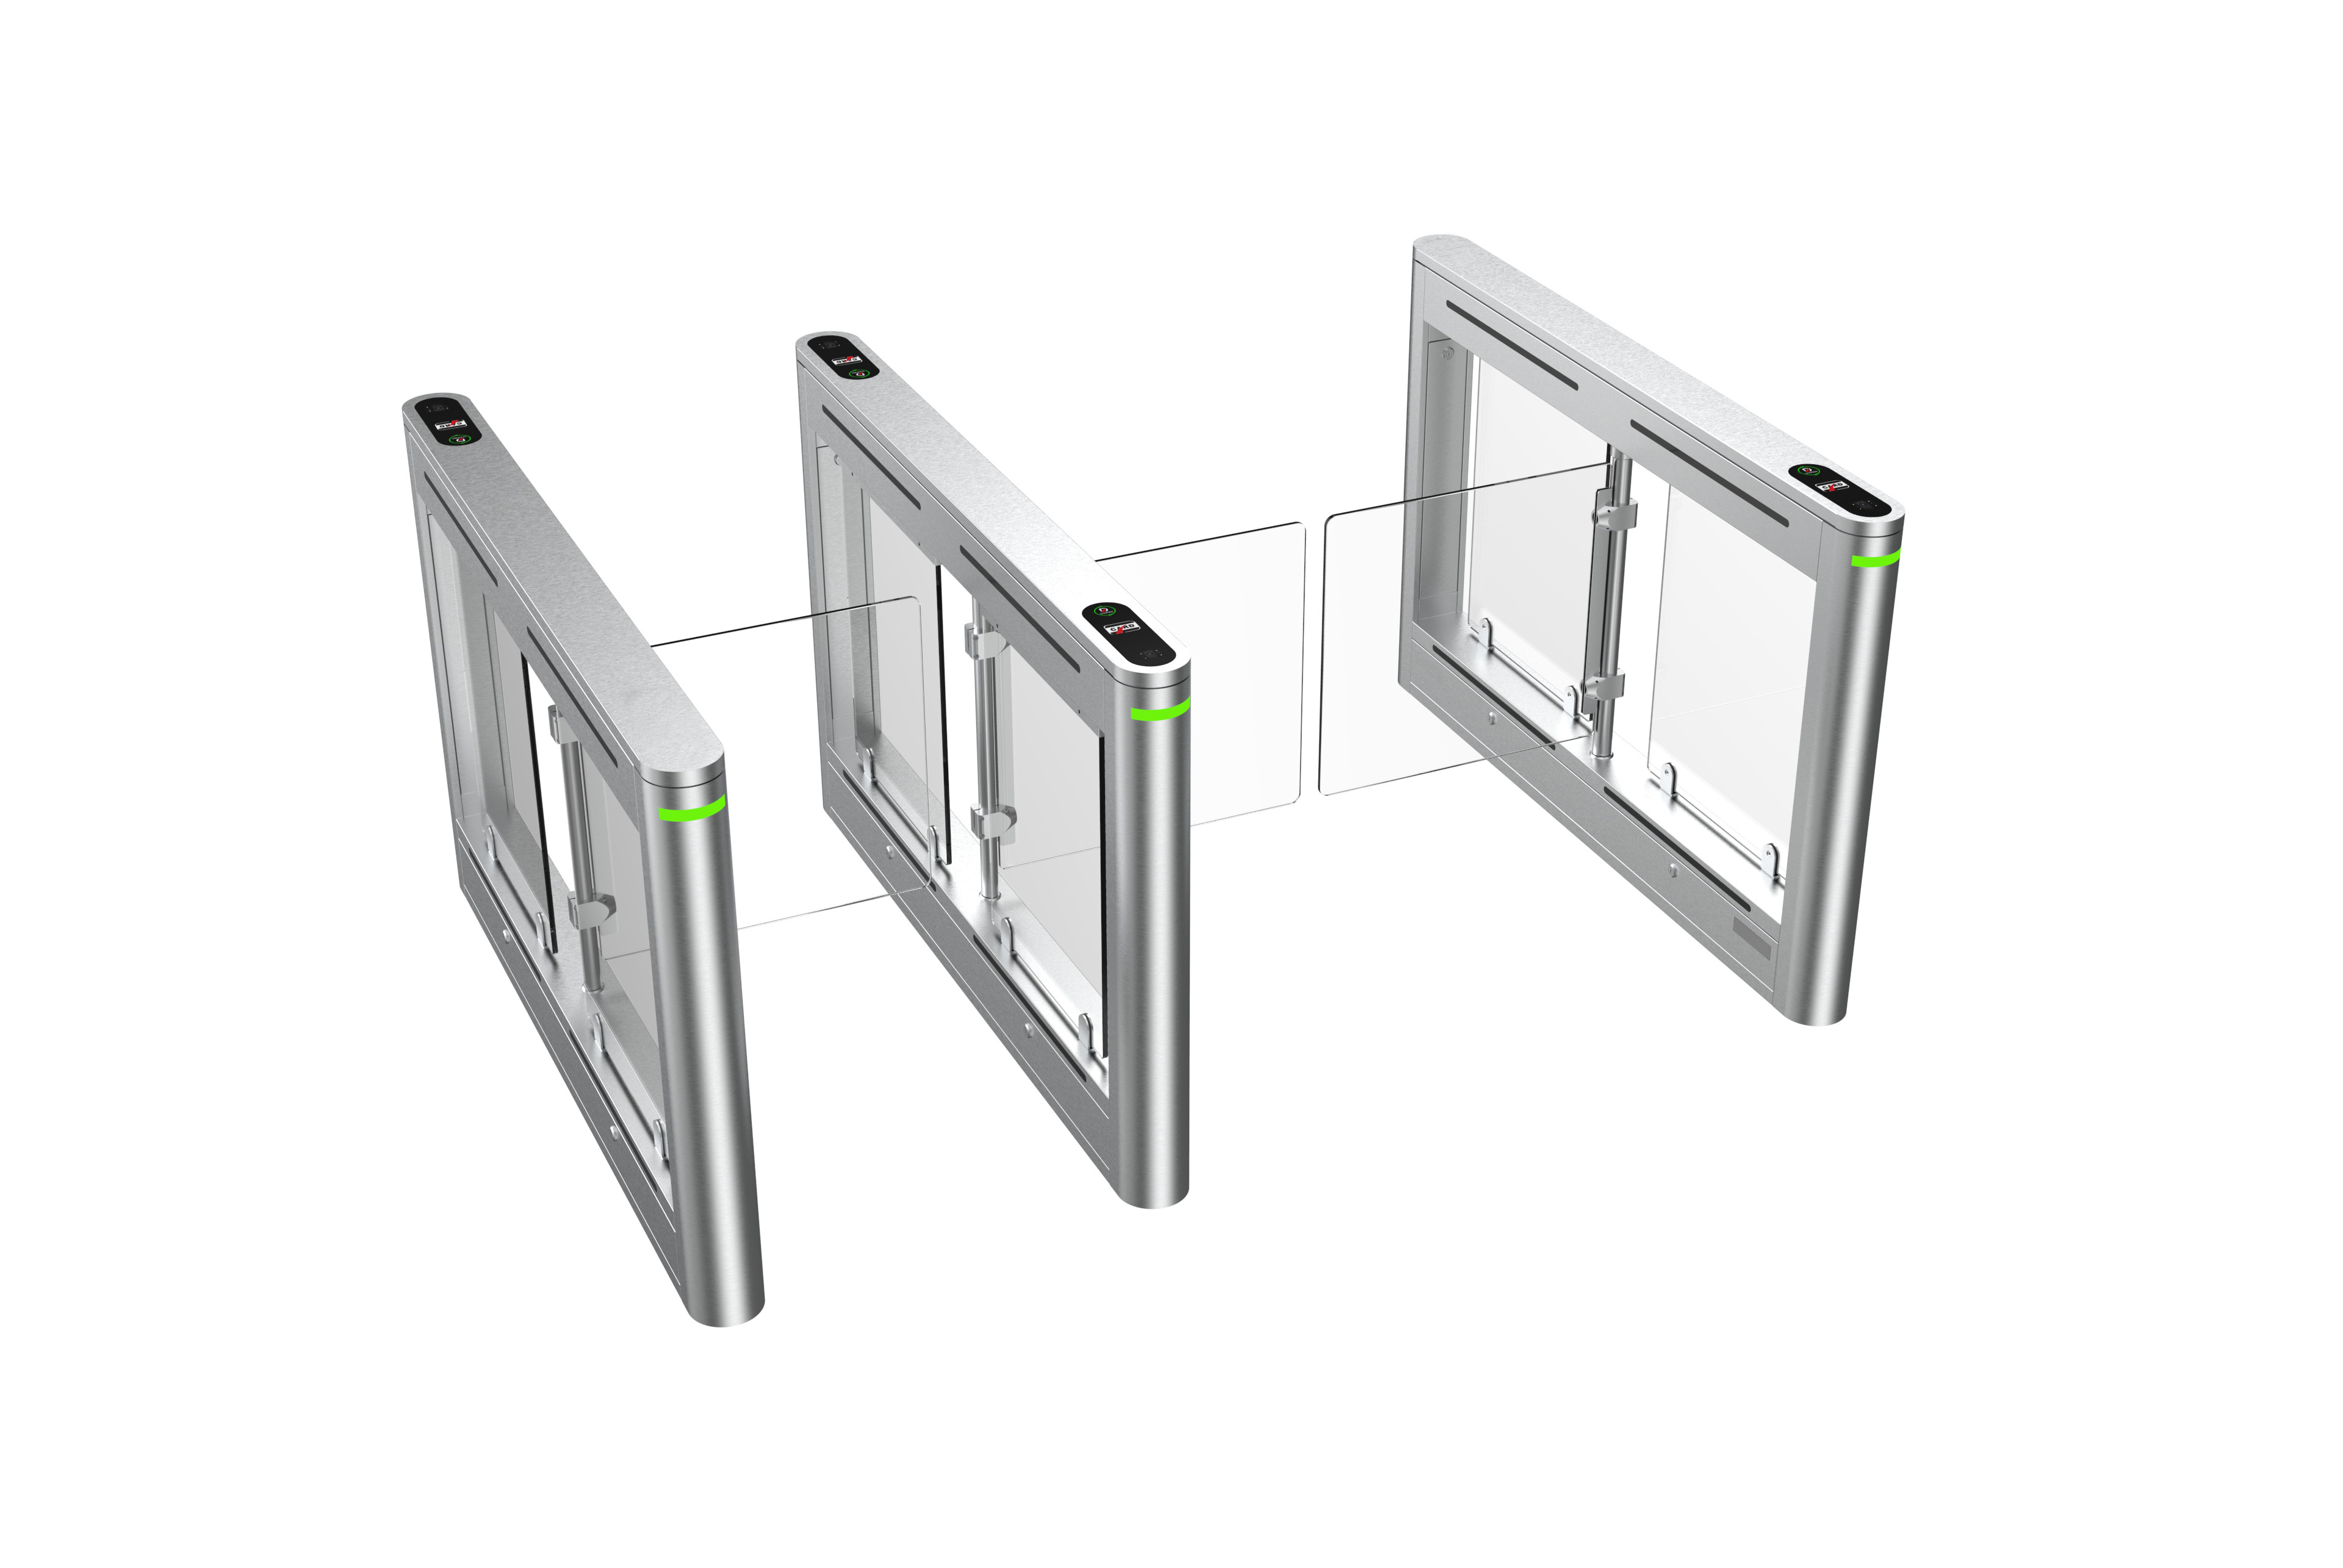 Traffic Control Swing Gate Acrylic Stainless Steel Arm Fingerprint Rejection For Pedestrian Flow Control